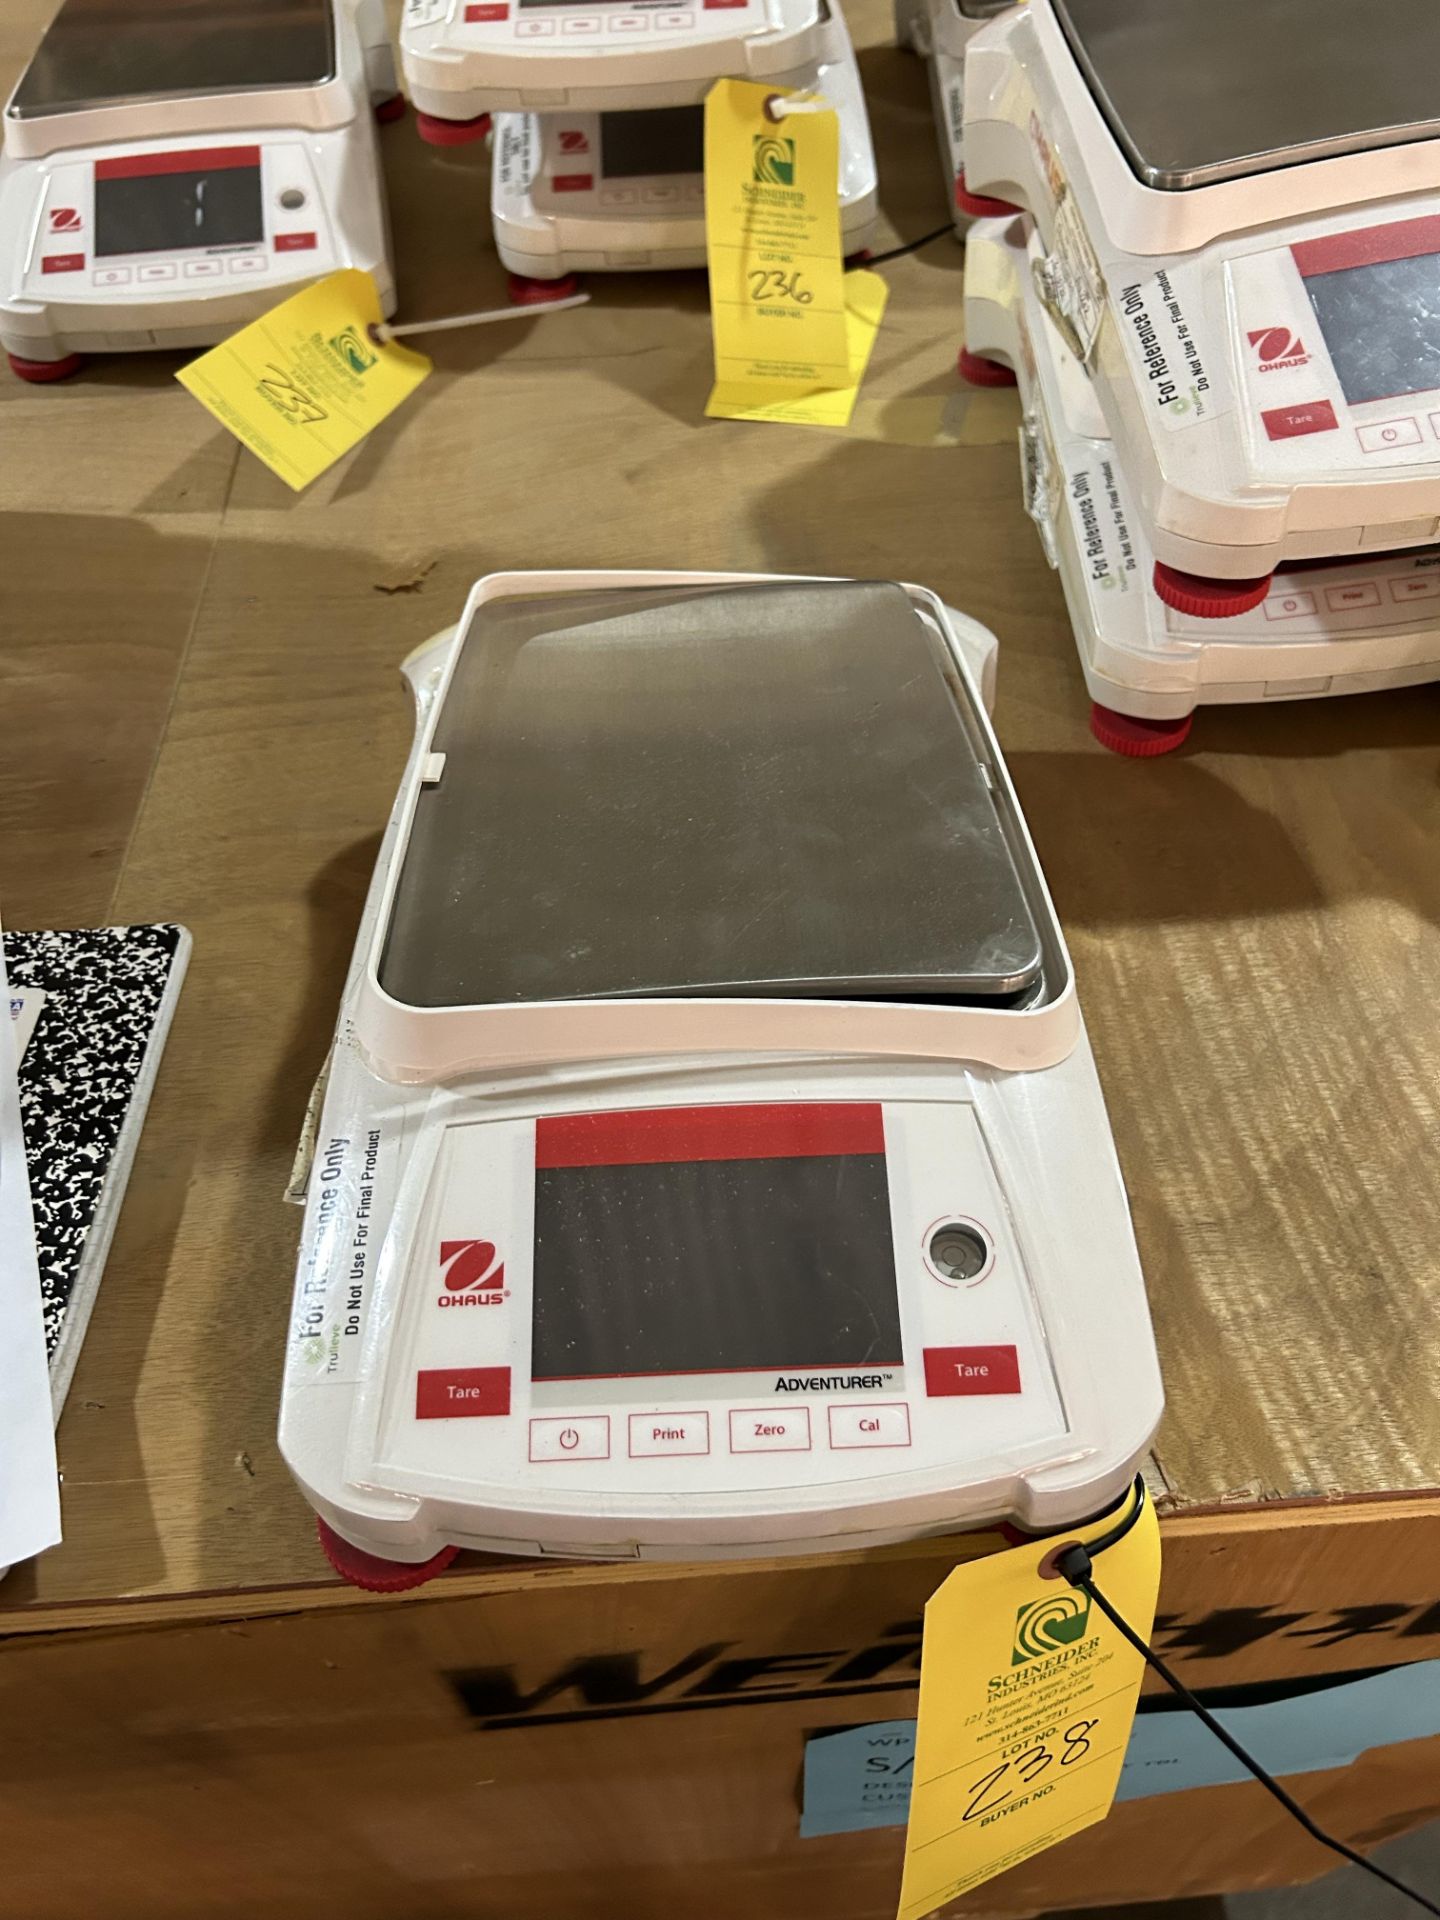 (Located in Quincy, FL) Ohaus Adventurer Precision Electronic Balance Scale, Model# AX2202, S/N